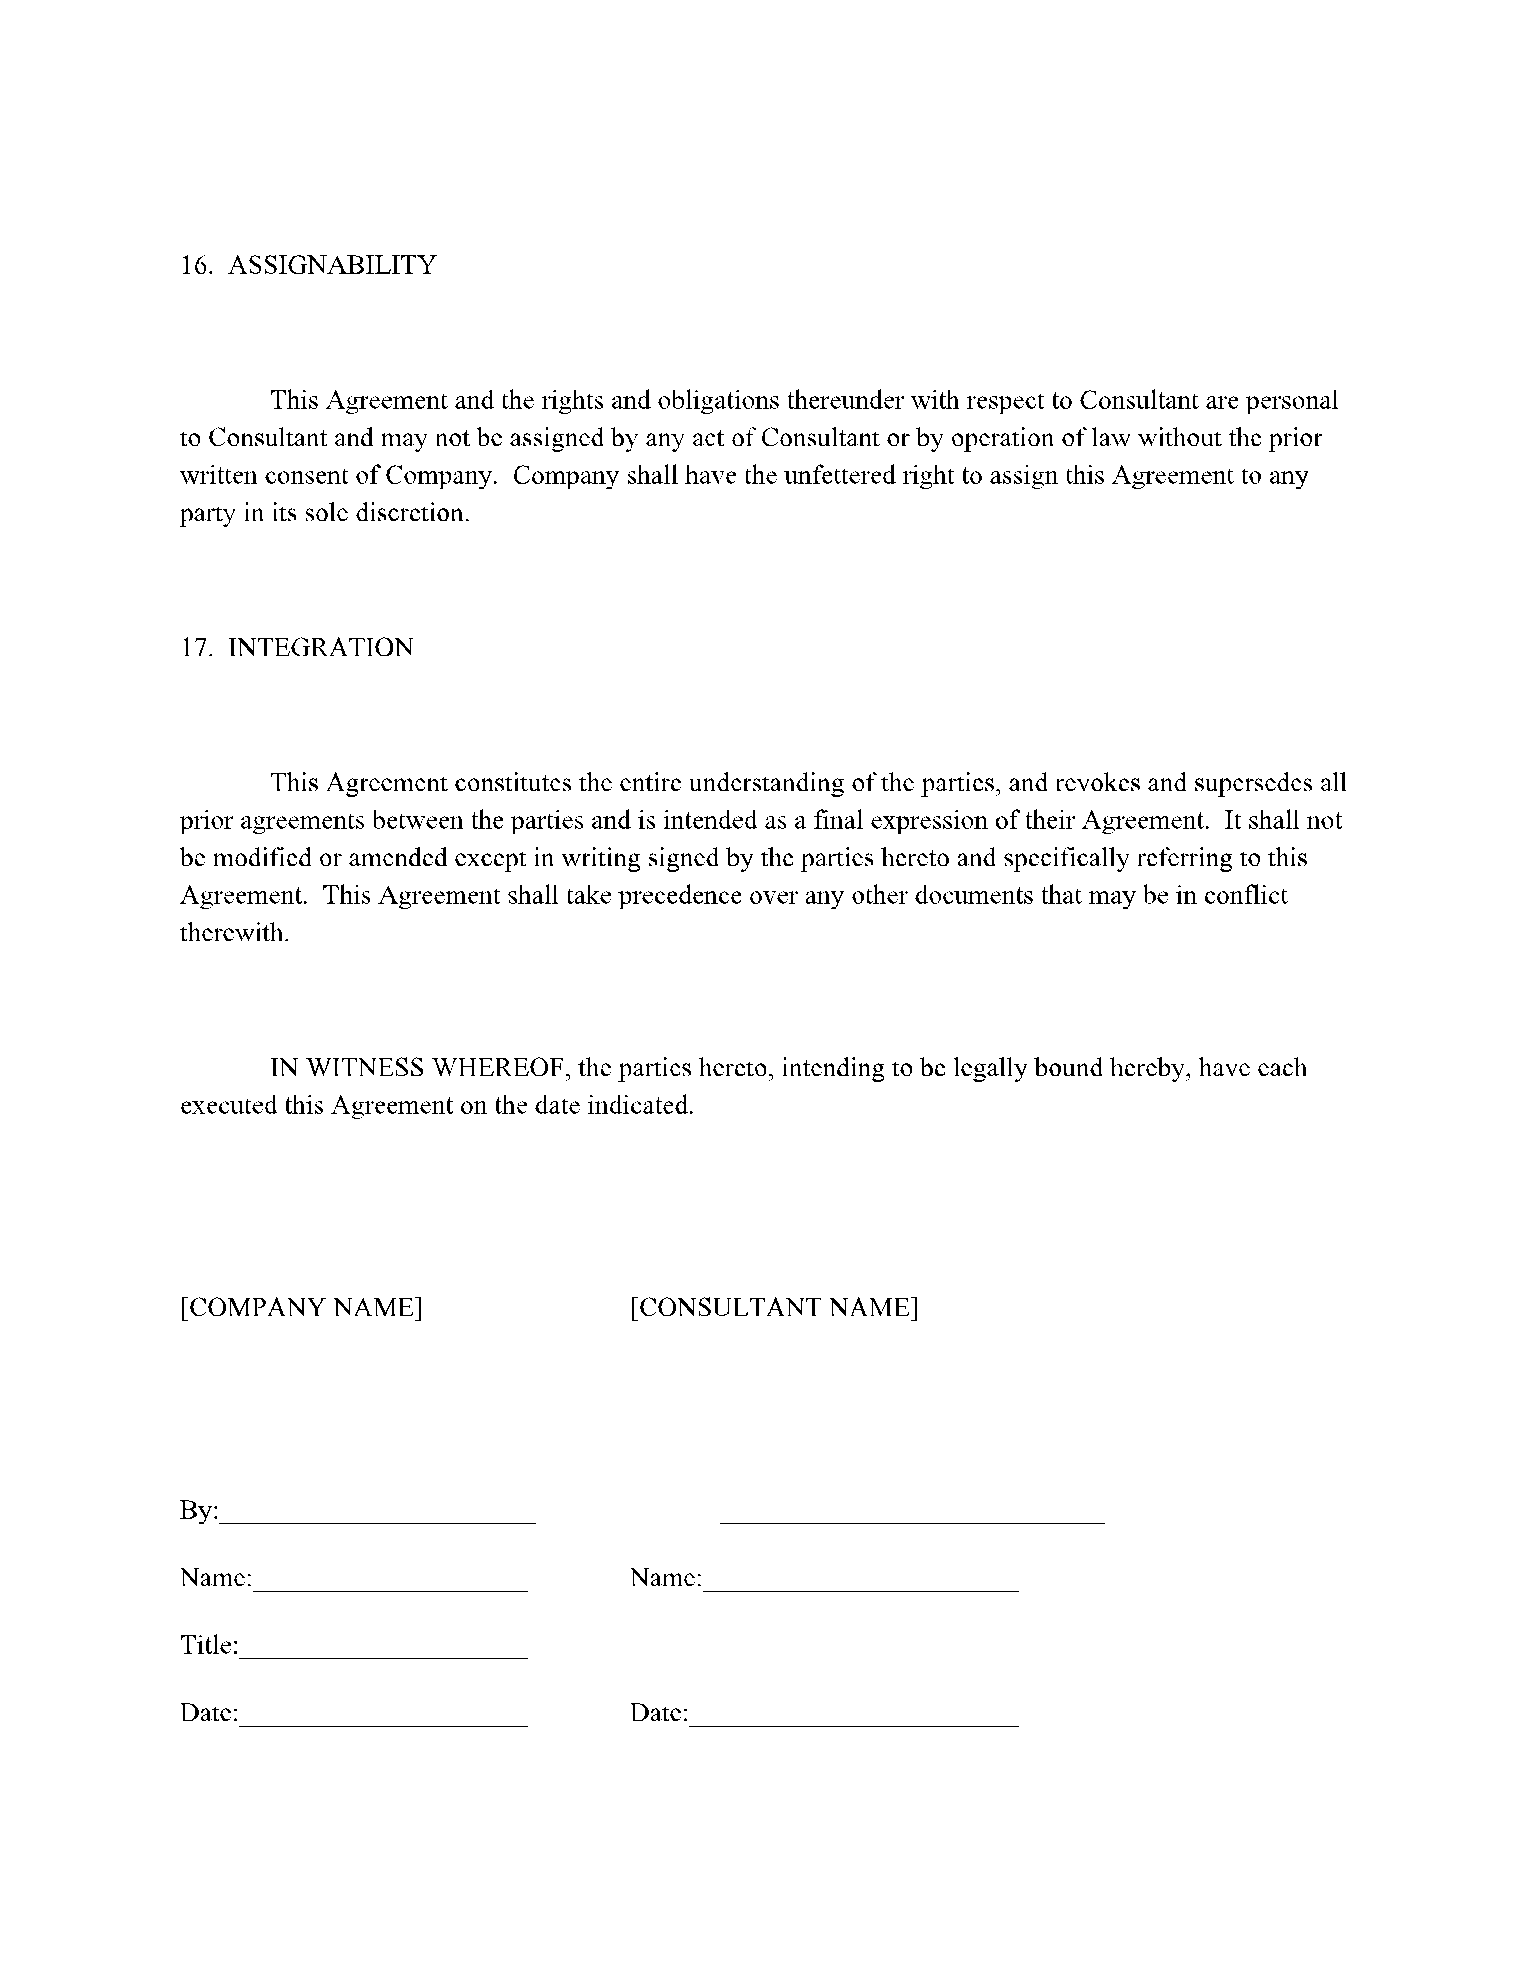 Work for Hire Agreement 10